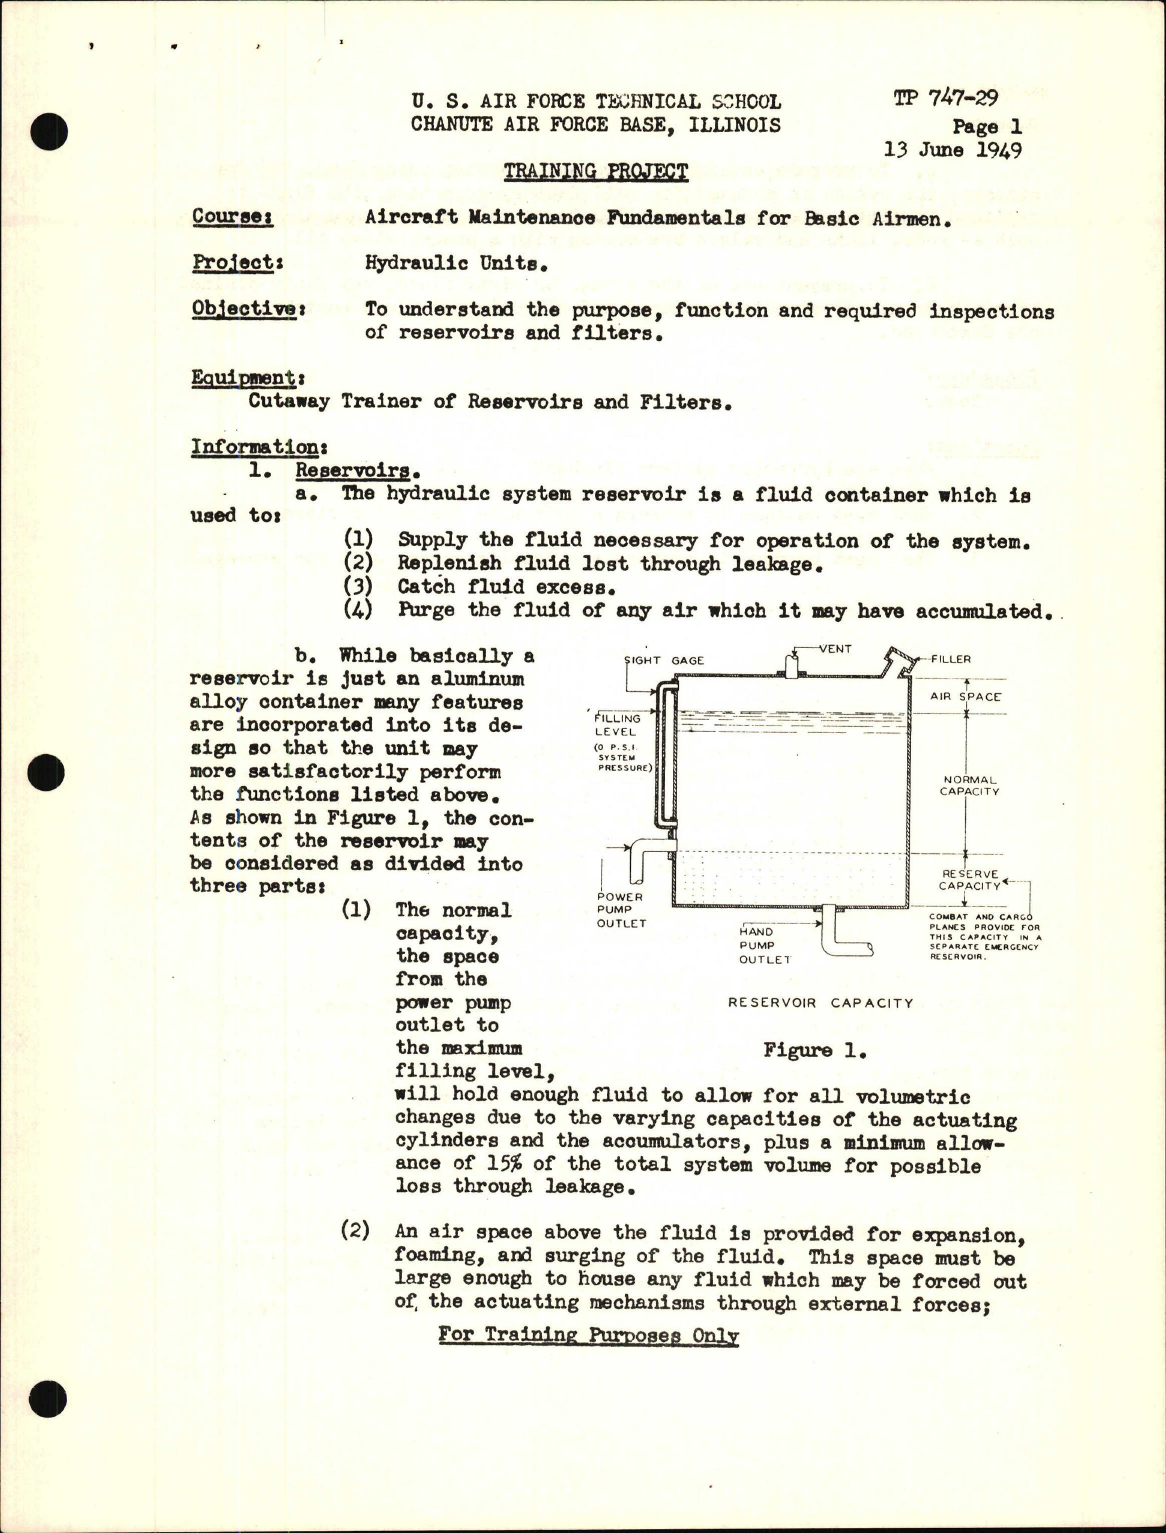 Sample page 1 from AirCorps Library document: Training Project, Hydraulic Units